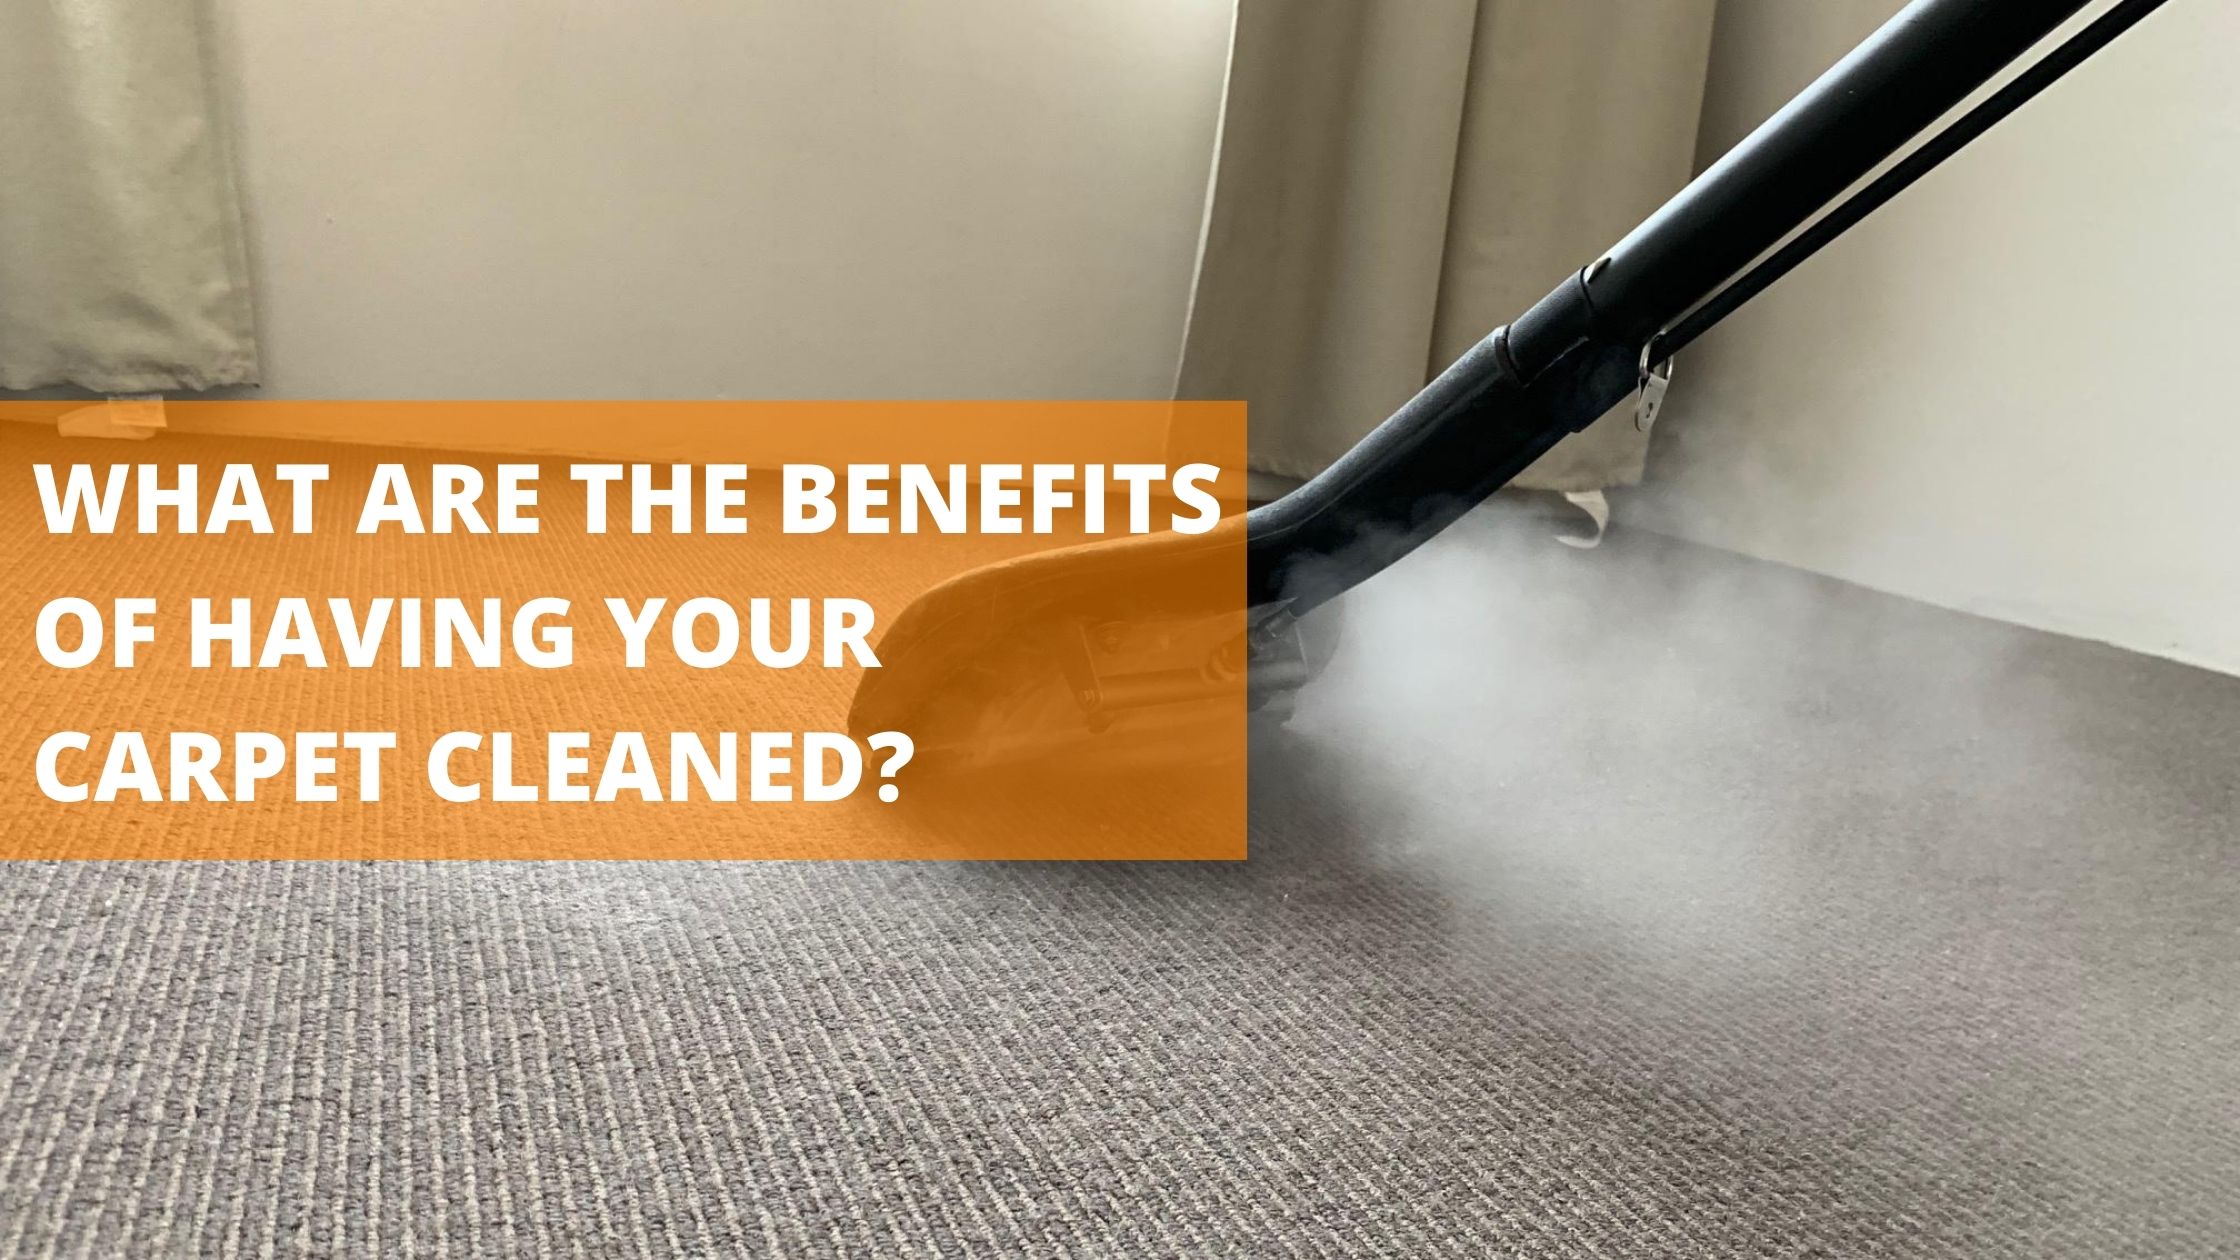 What Are The Benefits Of Having Your Carpet Cleaned?